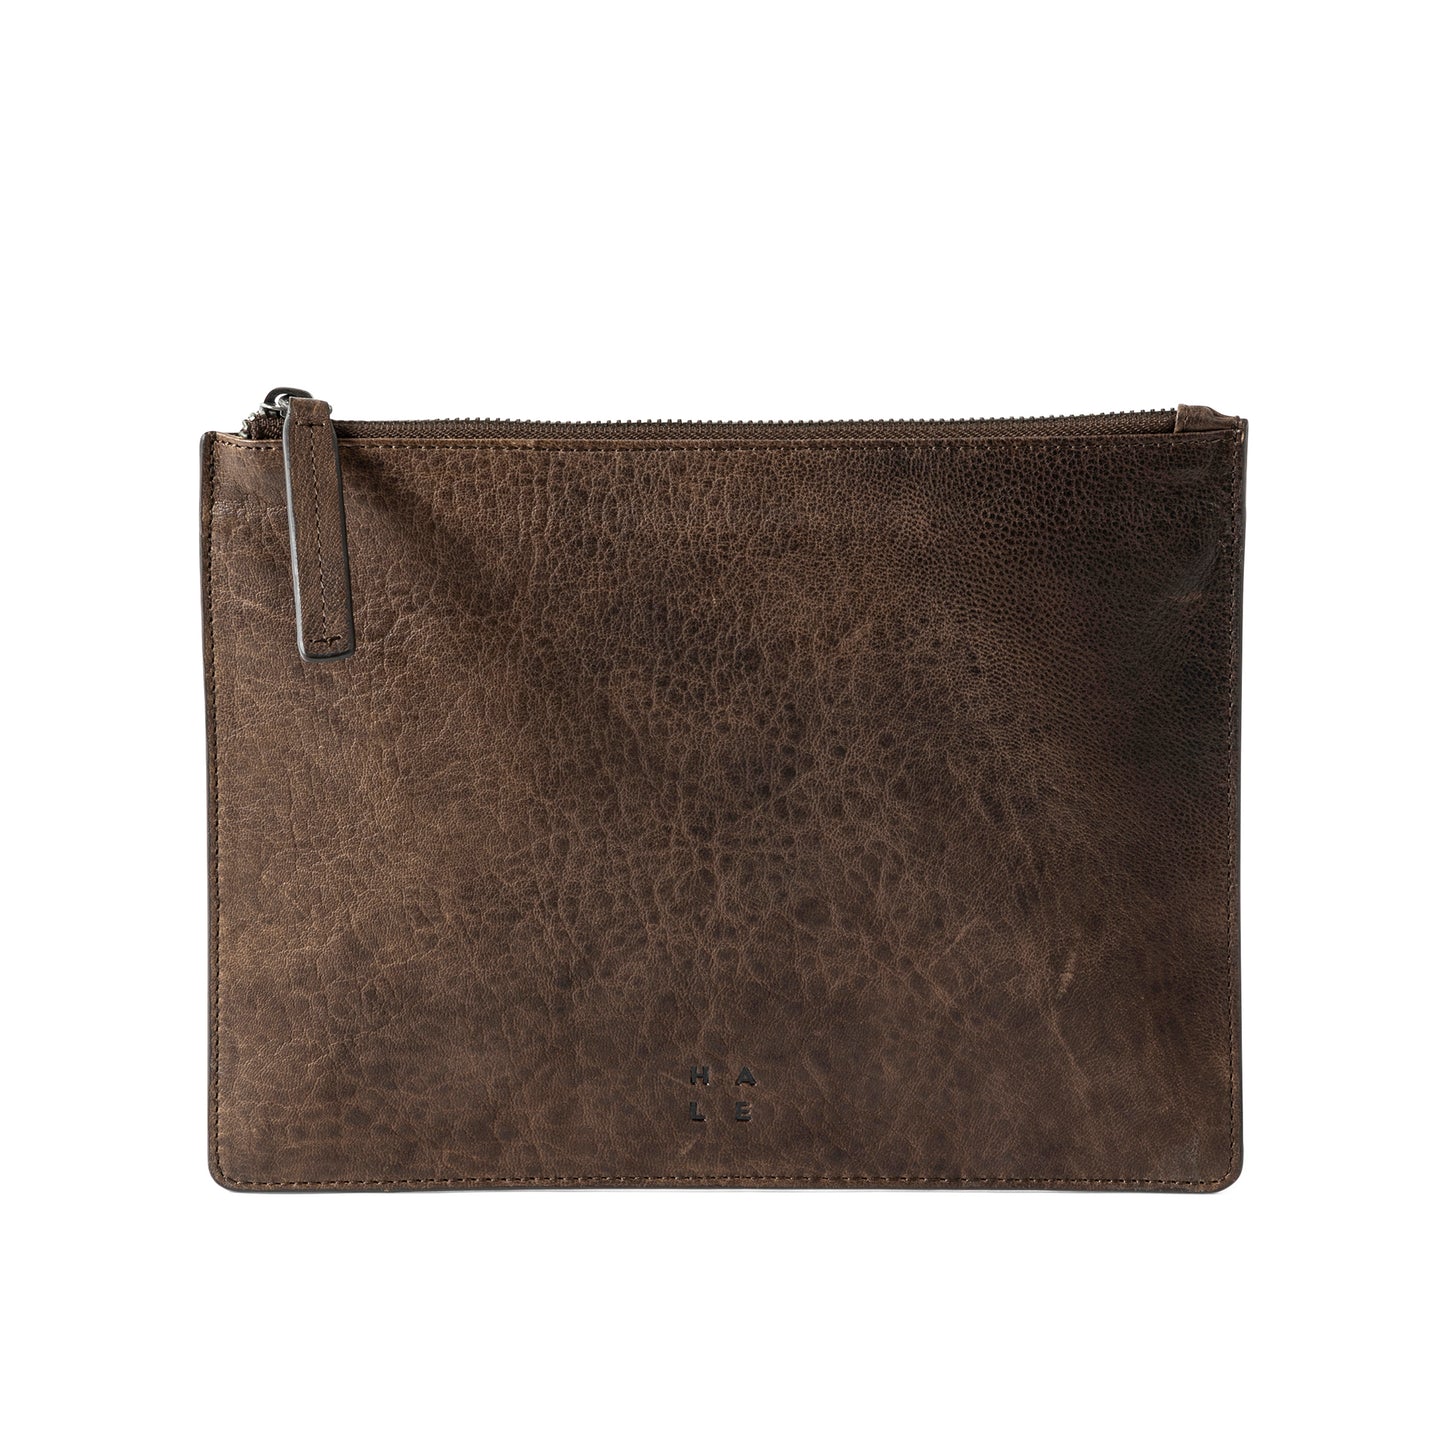 SIK Small Pouch Darkbrown